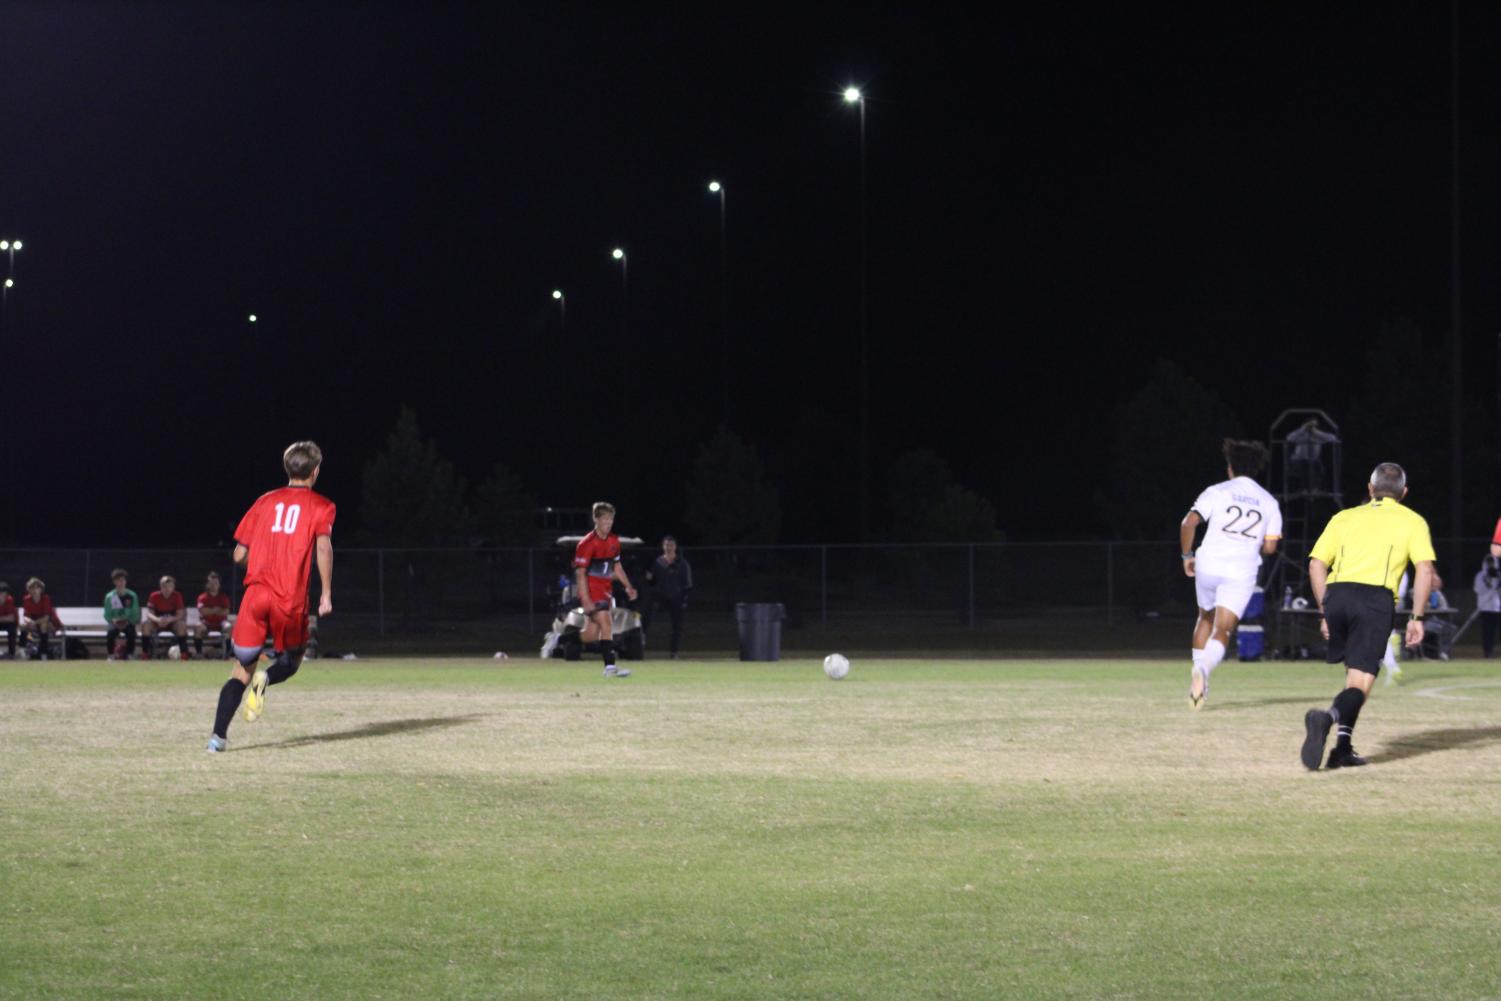 Boys+Soccer+triumph+over+Southaven+3-0+%7C+Game+slideshow.